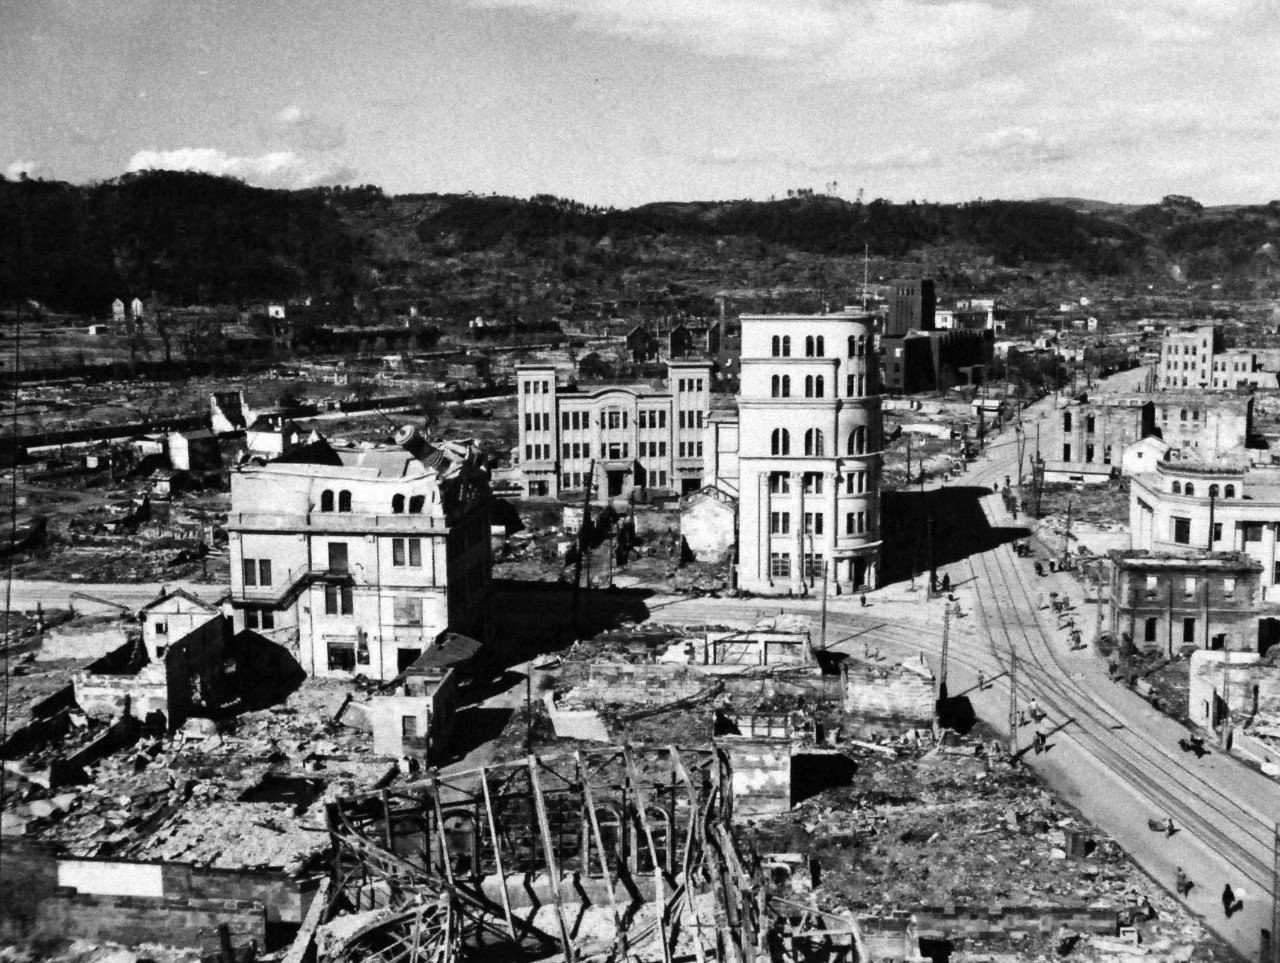 127-GW-1643-147643:   Nagasaki, Japan, 1945.   Bombed Kagoshima.   Photographed by Rogers at Nagasaki, Japan, November 1, 1945.        Official U.S. Marine Corps Photograph, now in the collections of the National Archives.  (2016/10/25).